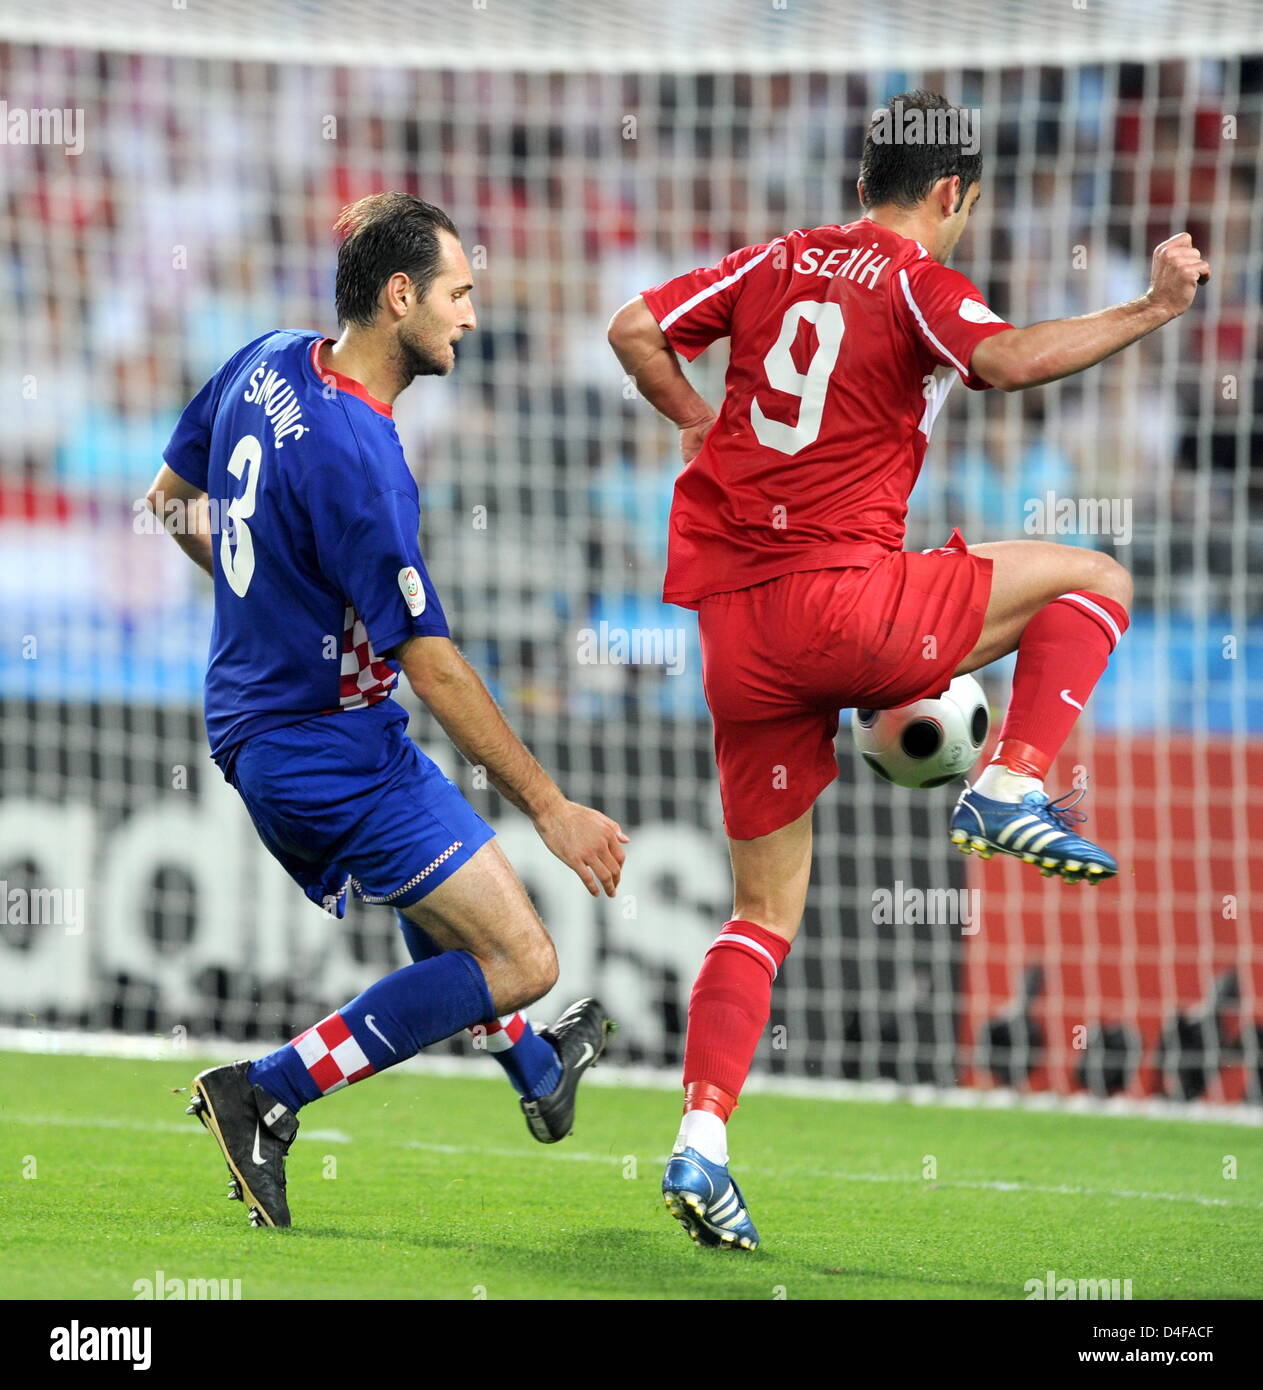 Josip Simunic (L) of Croatia vies with Semih Sentürk of Turkey during the UEFA EURO 2008 quarter final match between Croatia and Turkey at the Ernst Happel stadium in Vienna, Austria, 20 June 2008. Turkey won 3:1 in penalty shootout. Photo: Achim Scheidemann dpa +please note UEFA restrictions particulary in regard to slide shows and ÒNo Mobile ServicesÒ +++###dpa###+++ Stock Photo